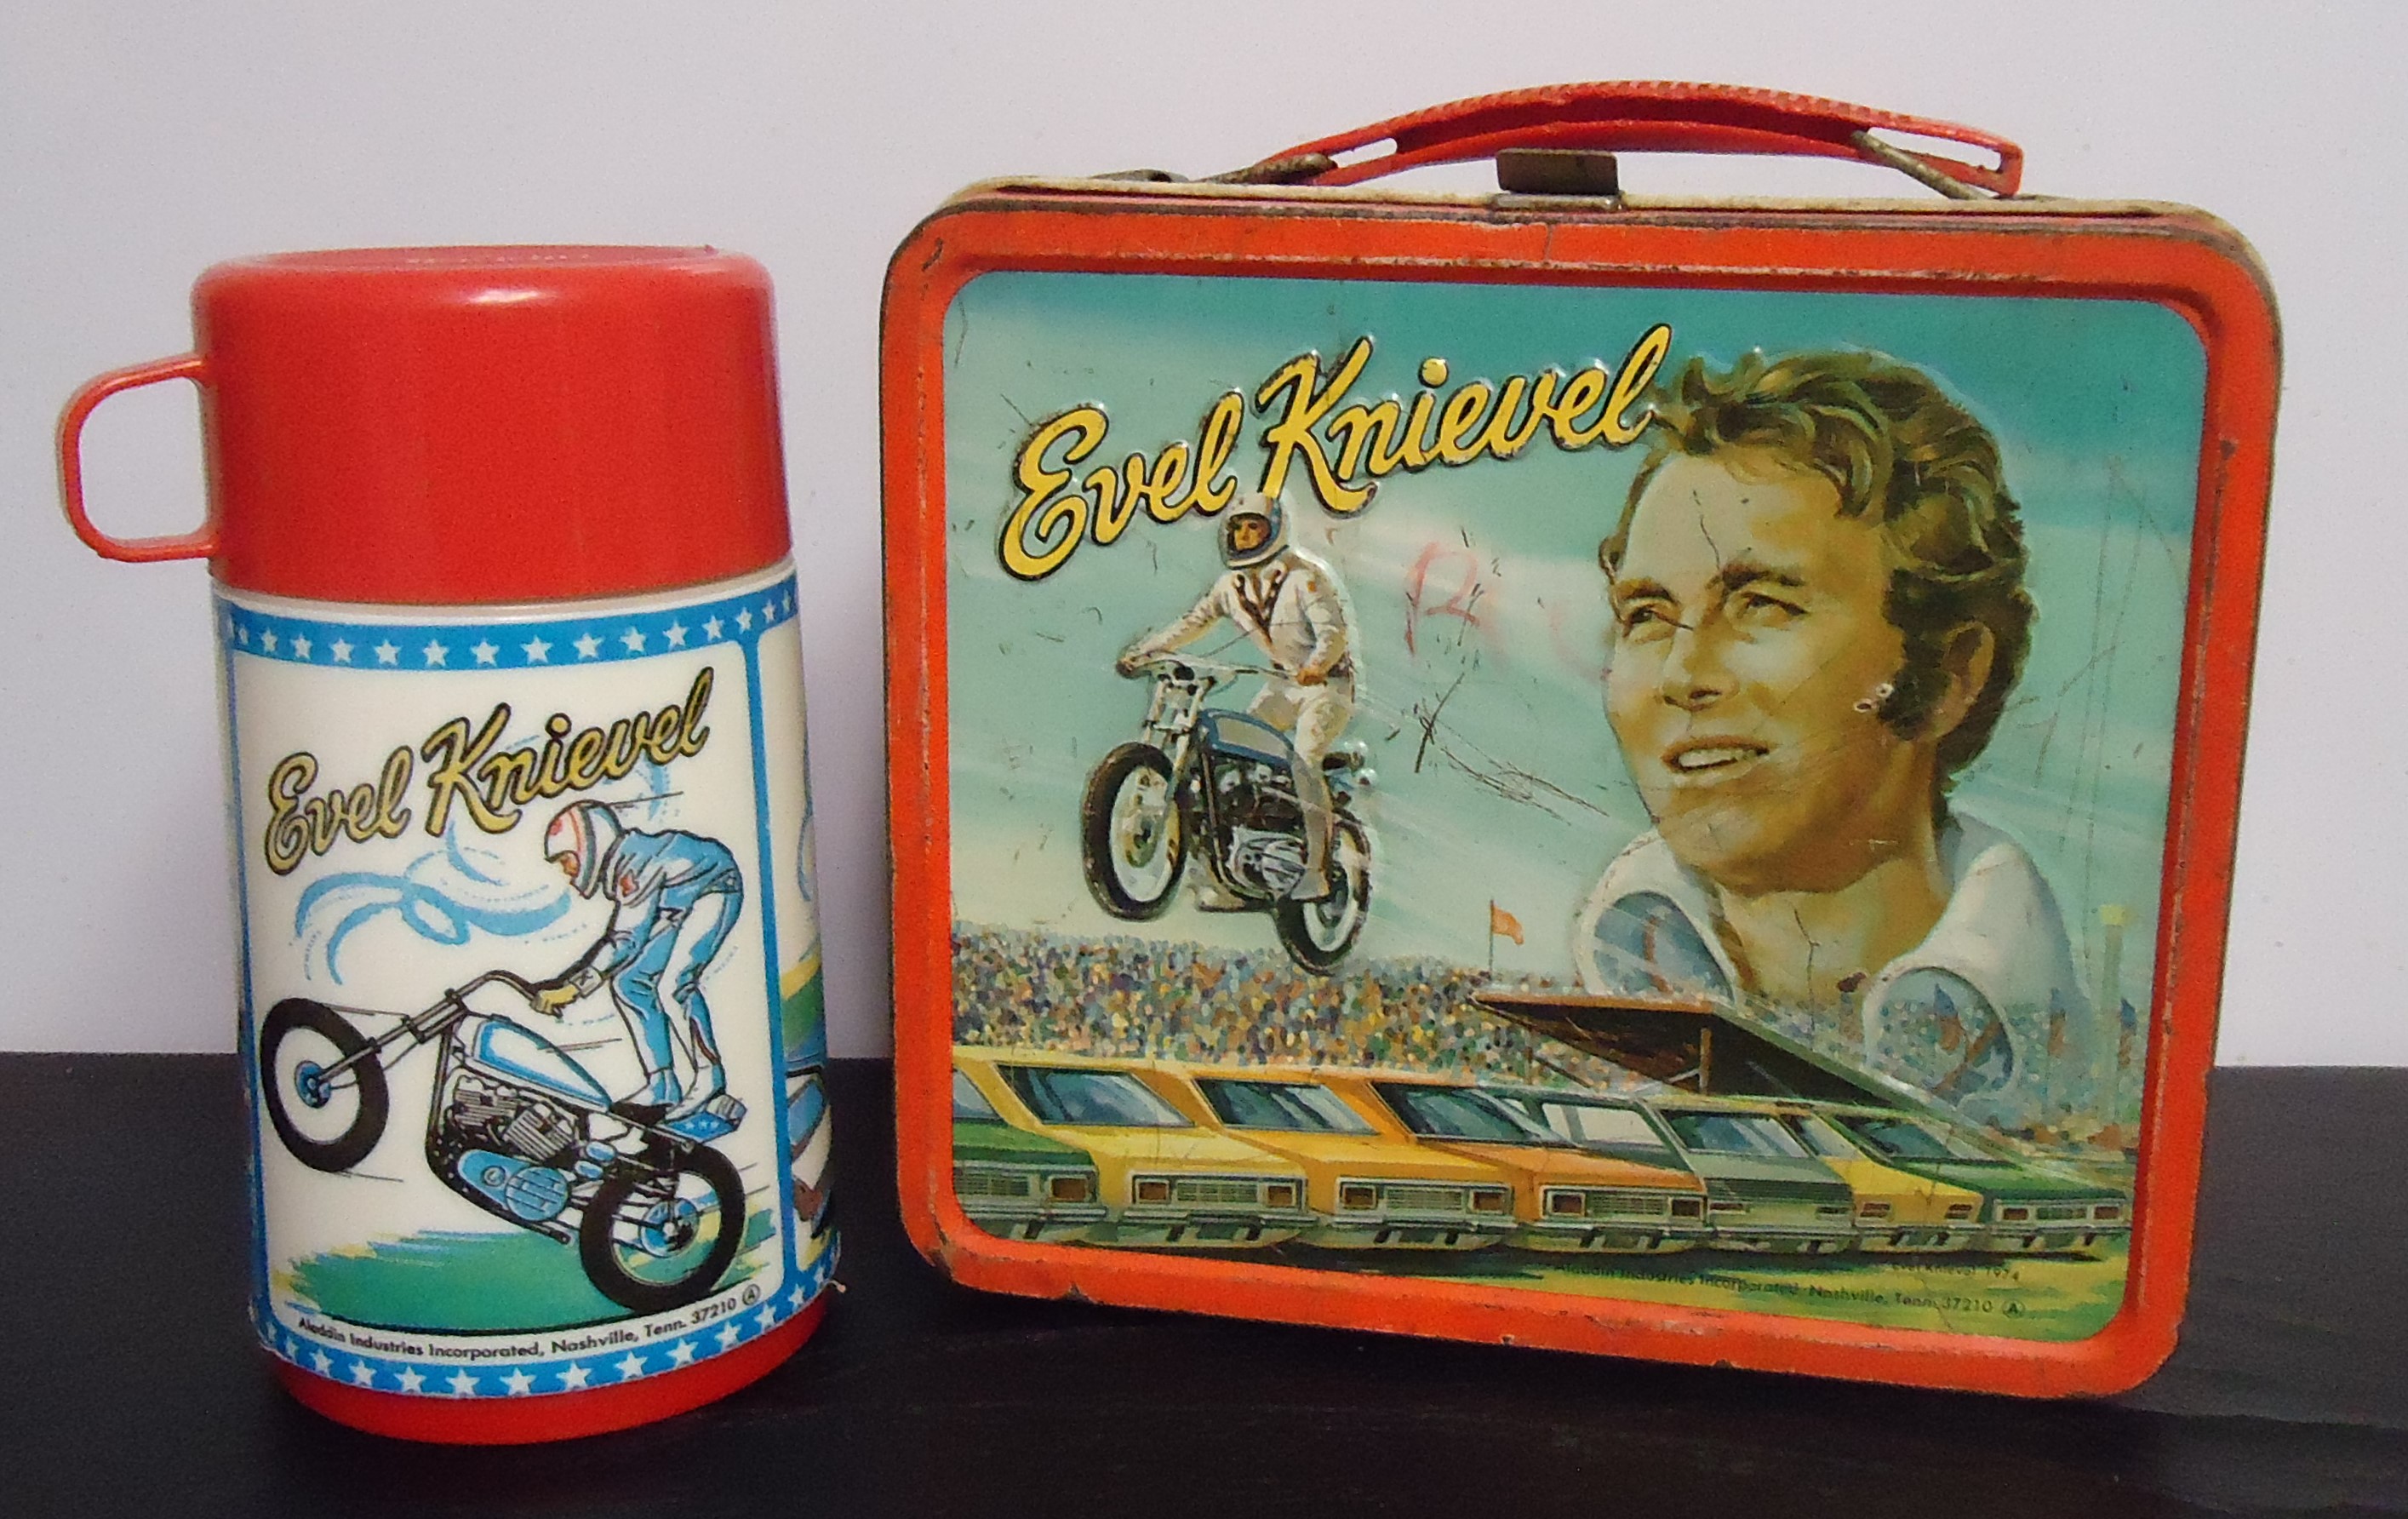 (1) "Evel Knievel" Metal Lunch Box
W/ Thermos
$200.00